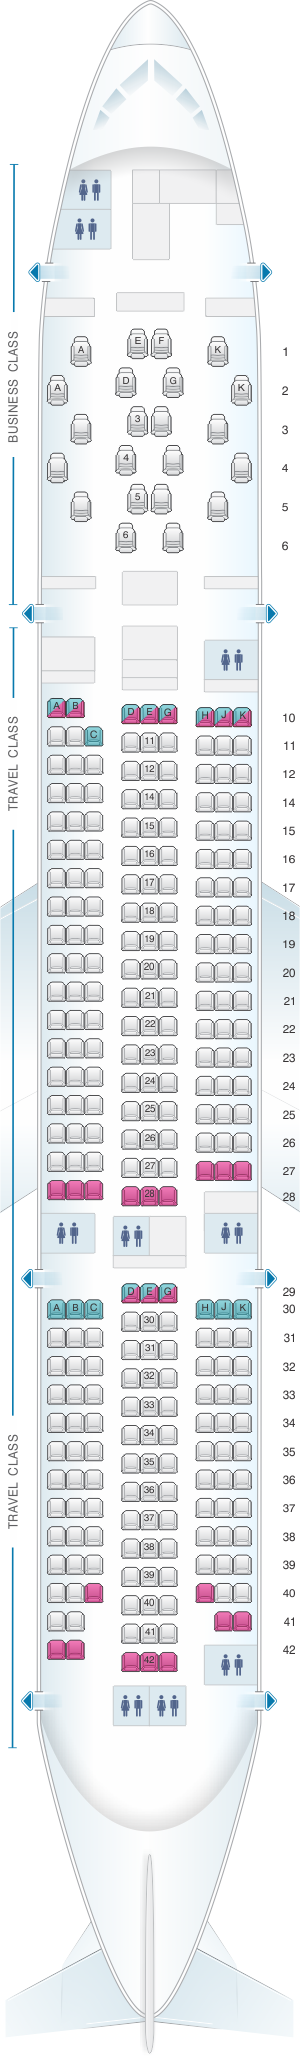 Seat map for Asiana Airlines Boeing B777 200ER 294PAX